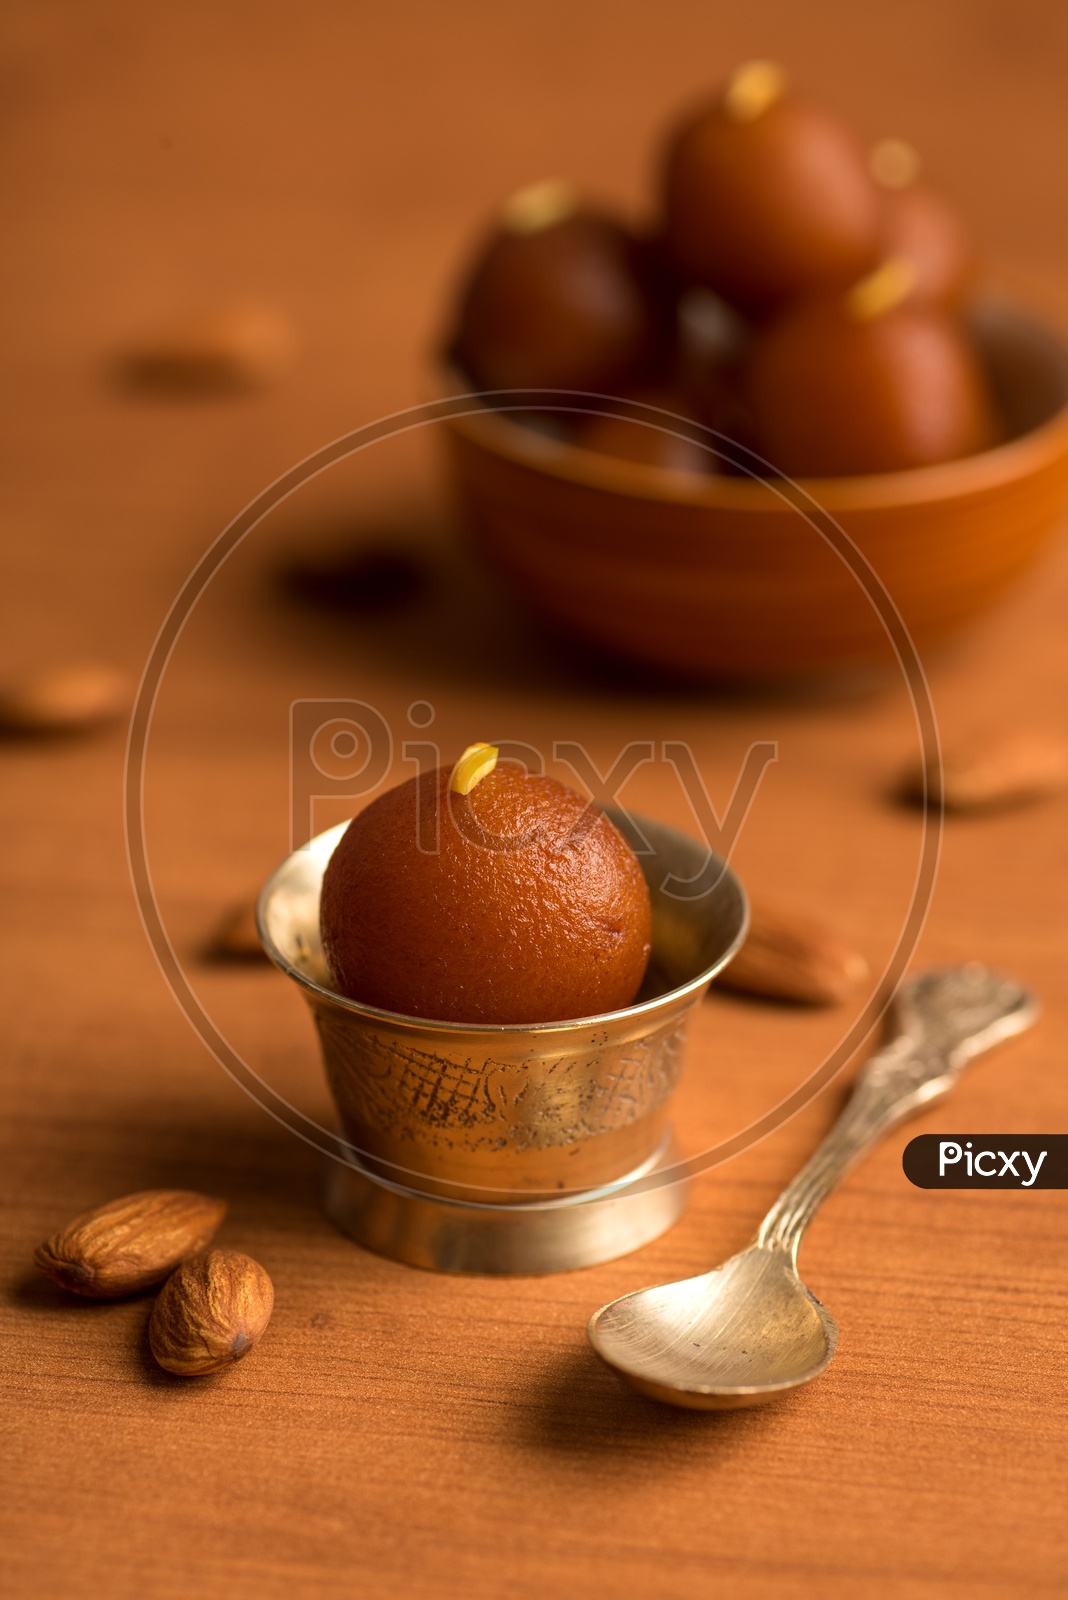 Indian Sweet or Dessert or Savoury Gulab Jamun  Served in an Elegant Bowl Along With a Spoon On an Isolated Wooden Background